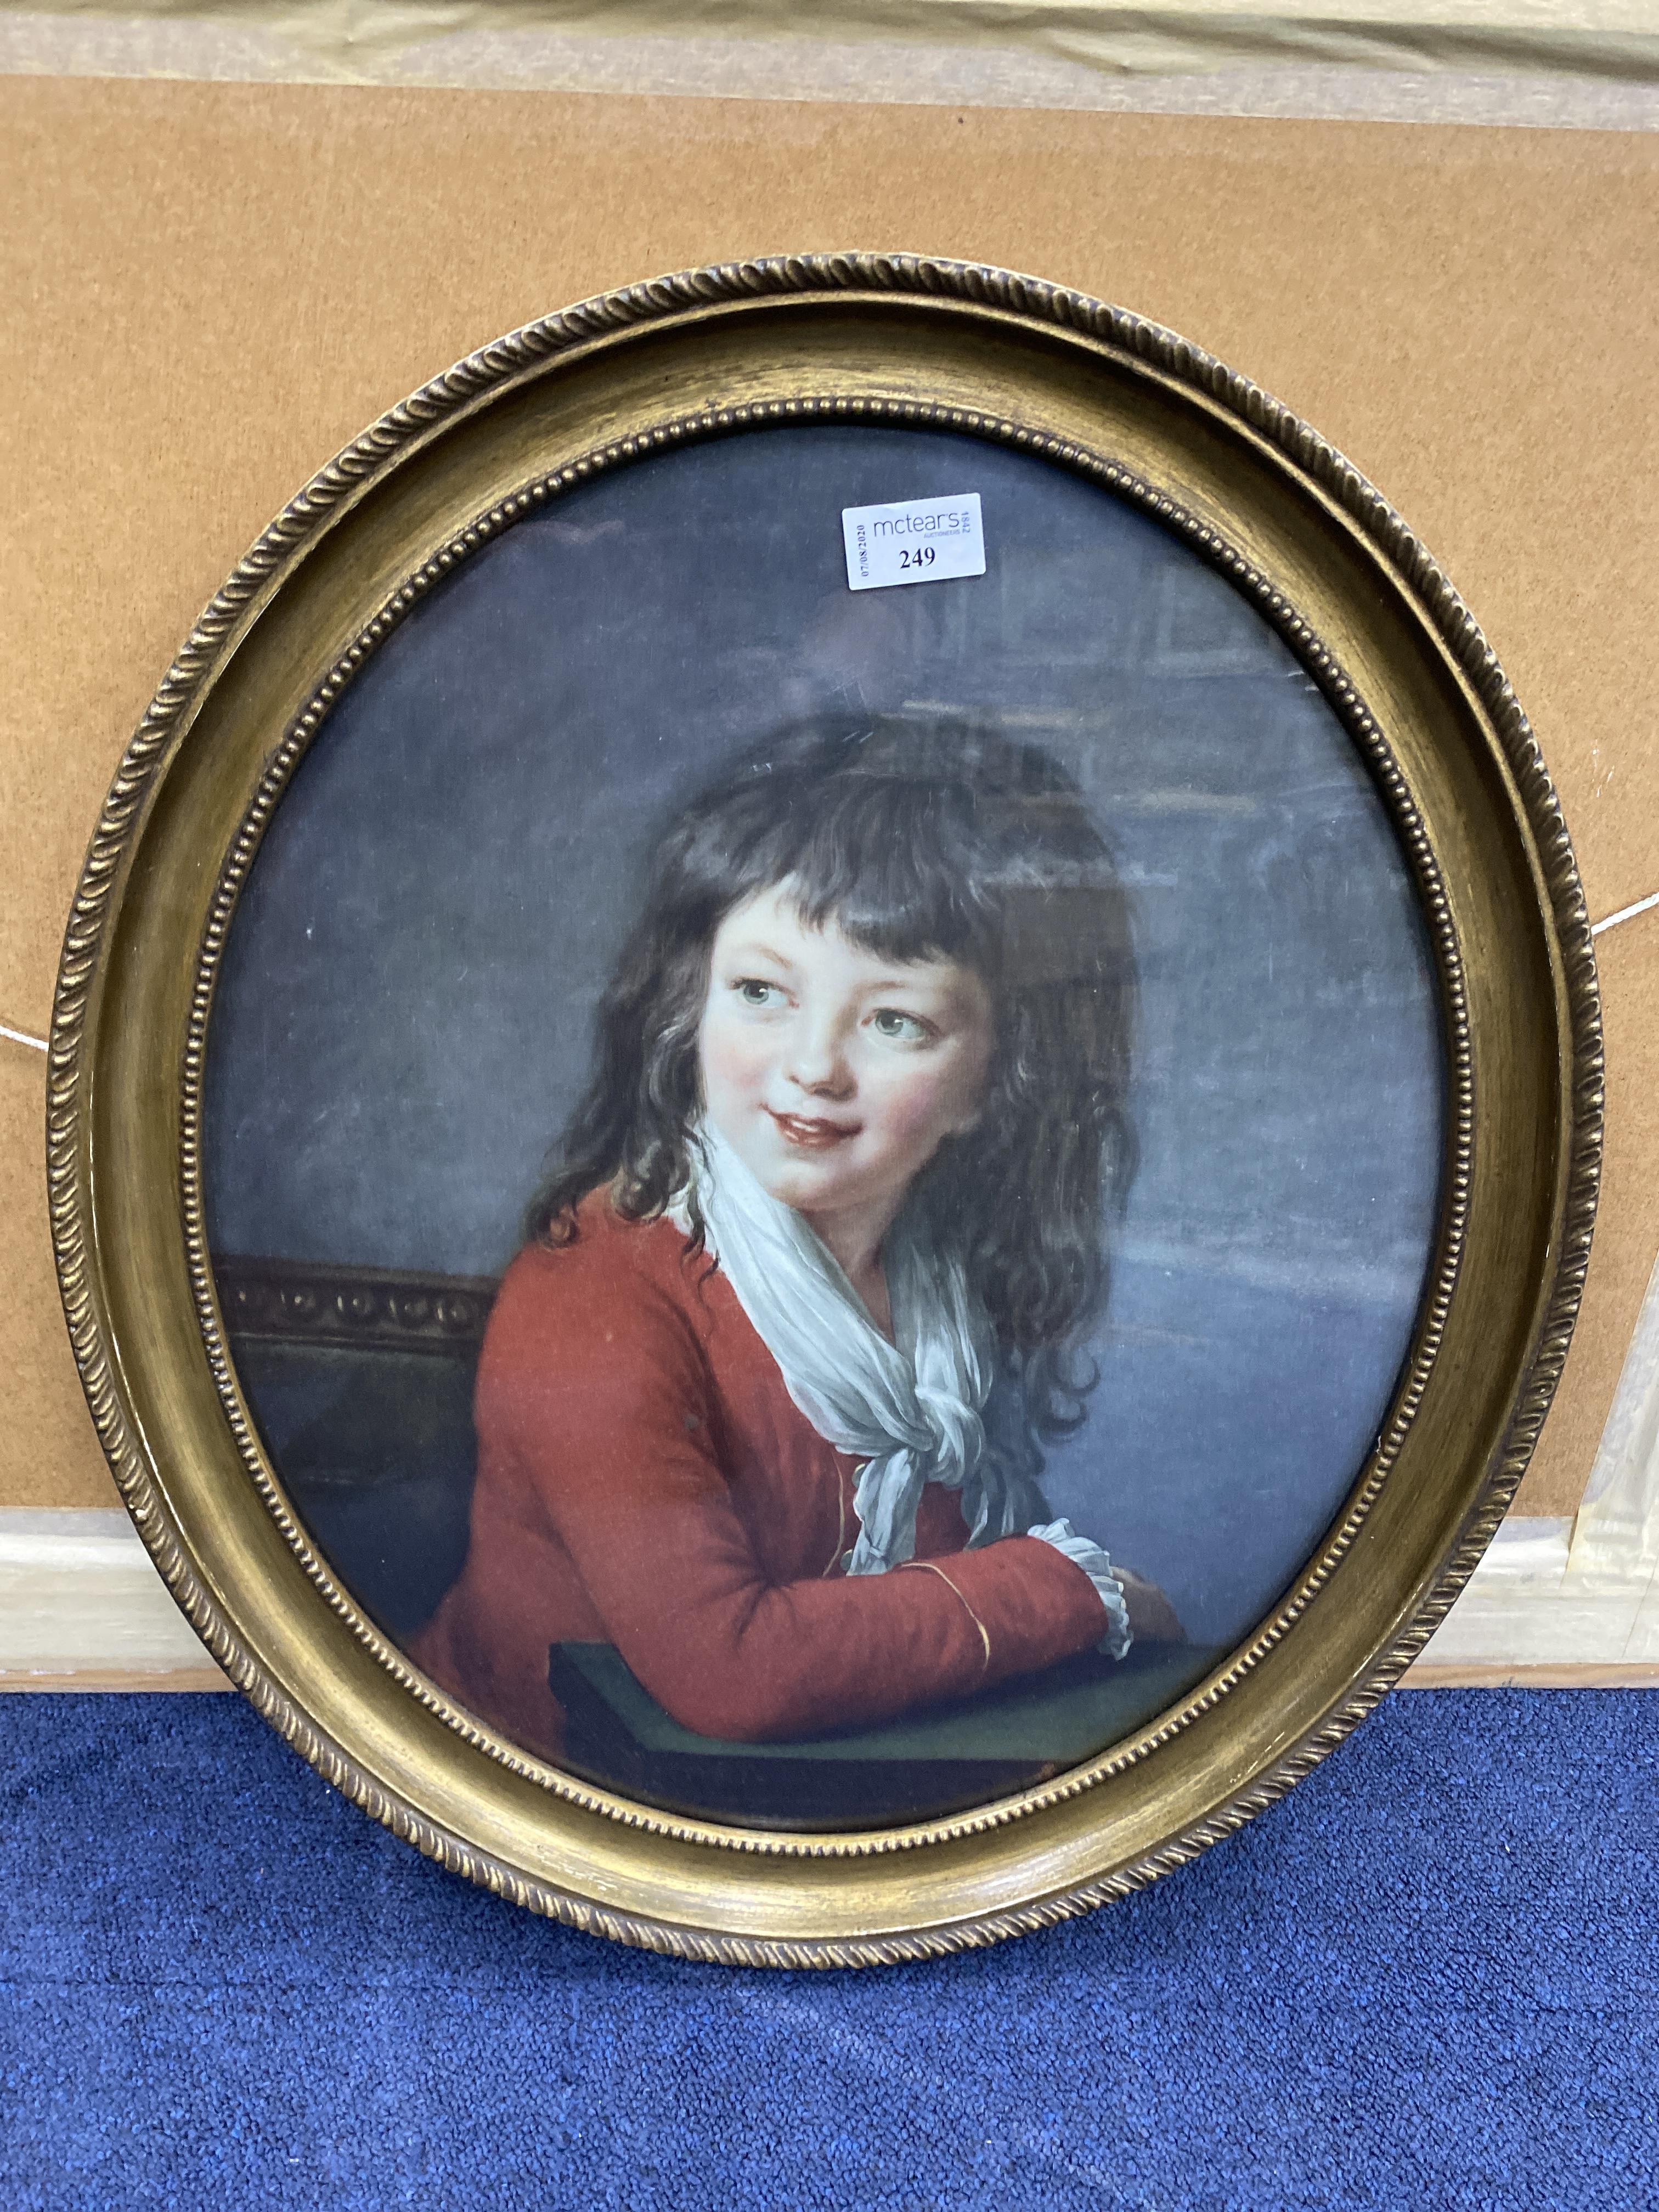 BOY IN RED, A MEDICI PRINT AFTER VIGEE LE BRUN